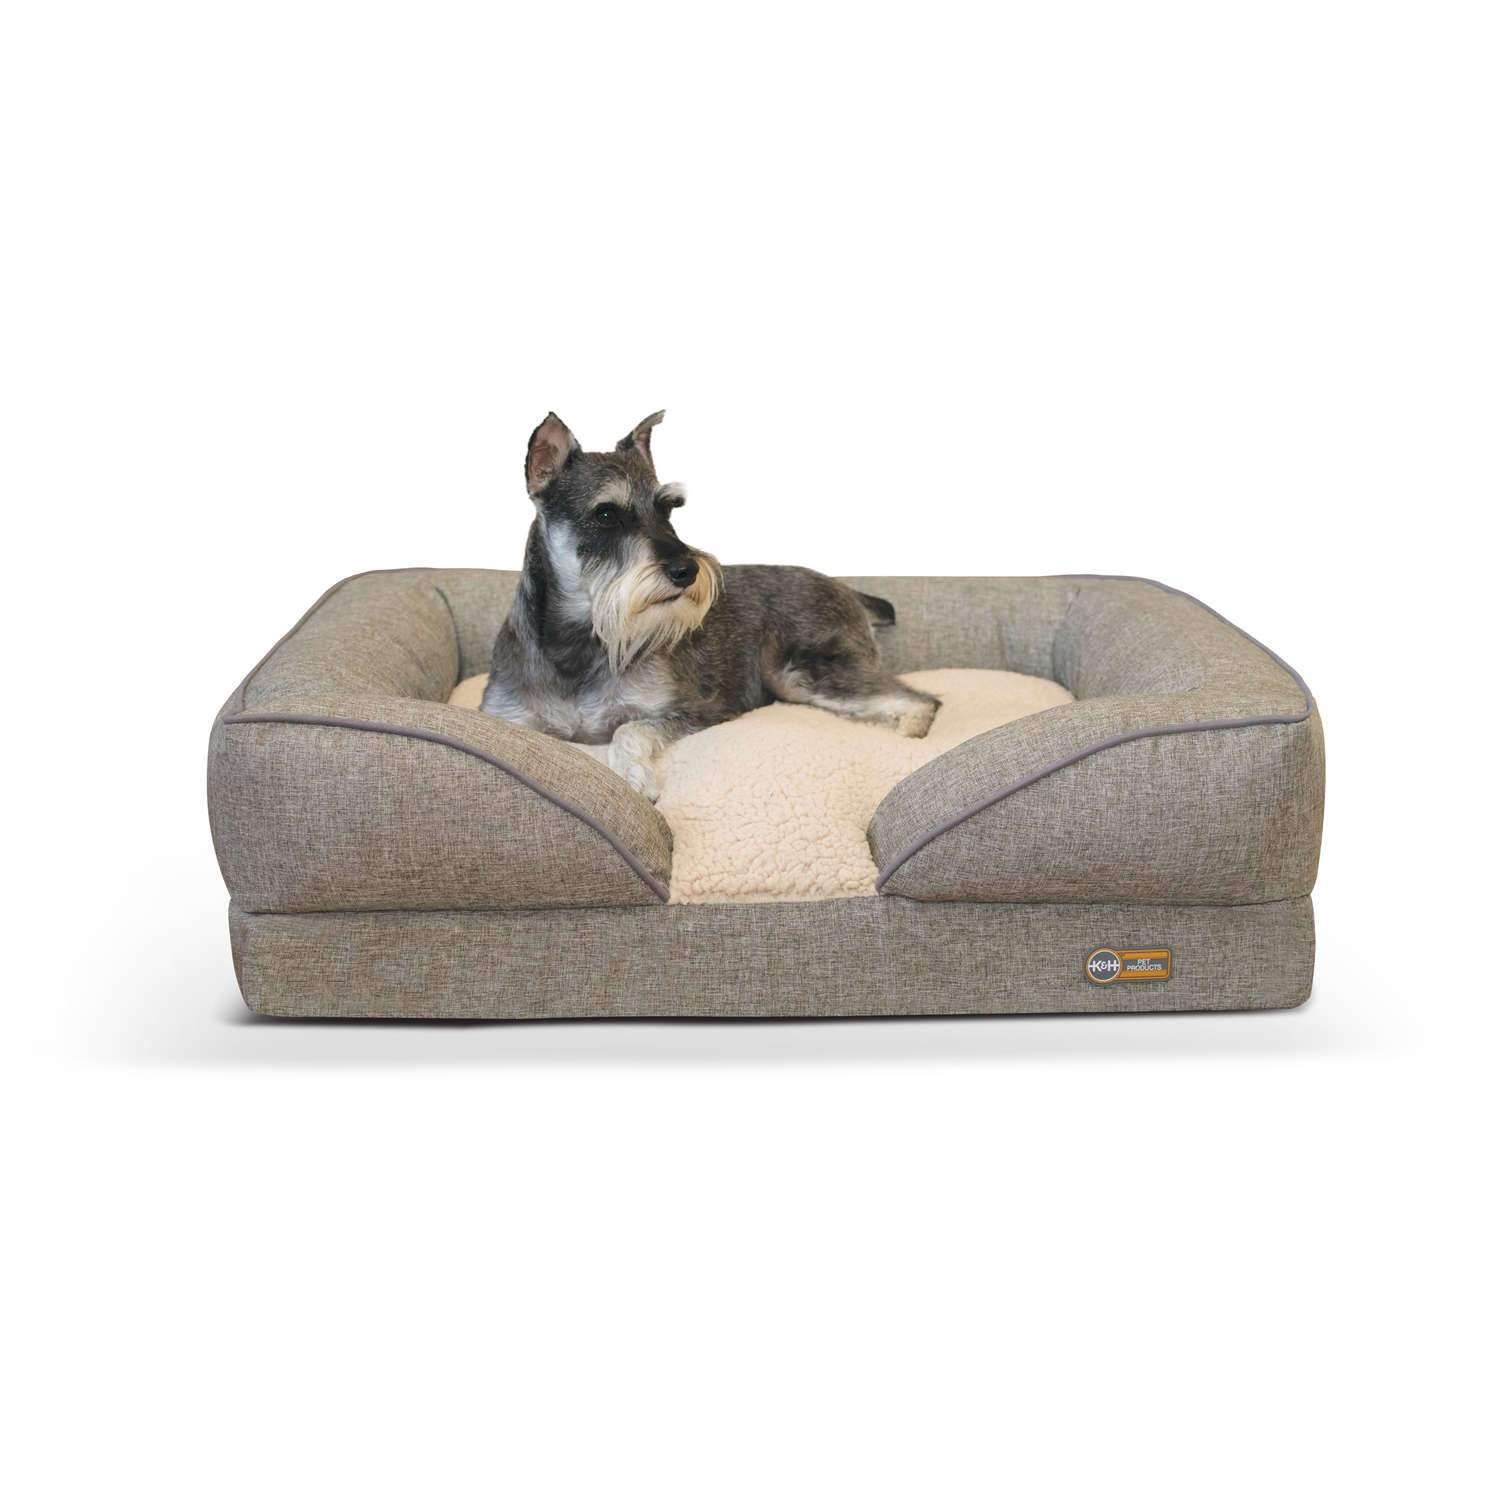 K&h Pet Products Kh4781 Pillow-top Orthopedic Pet Lounger